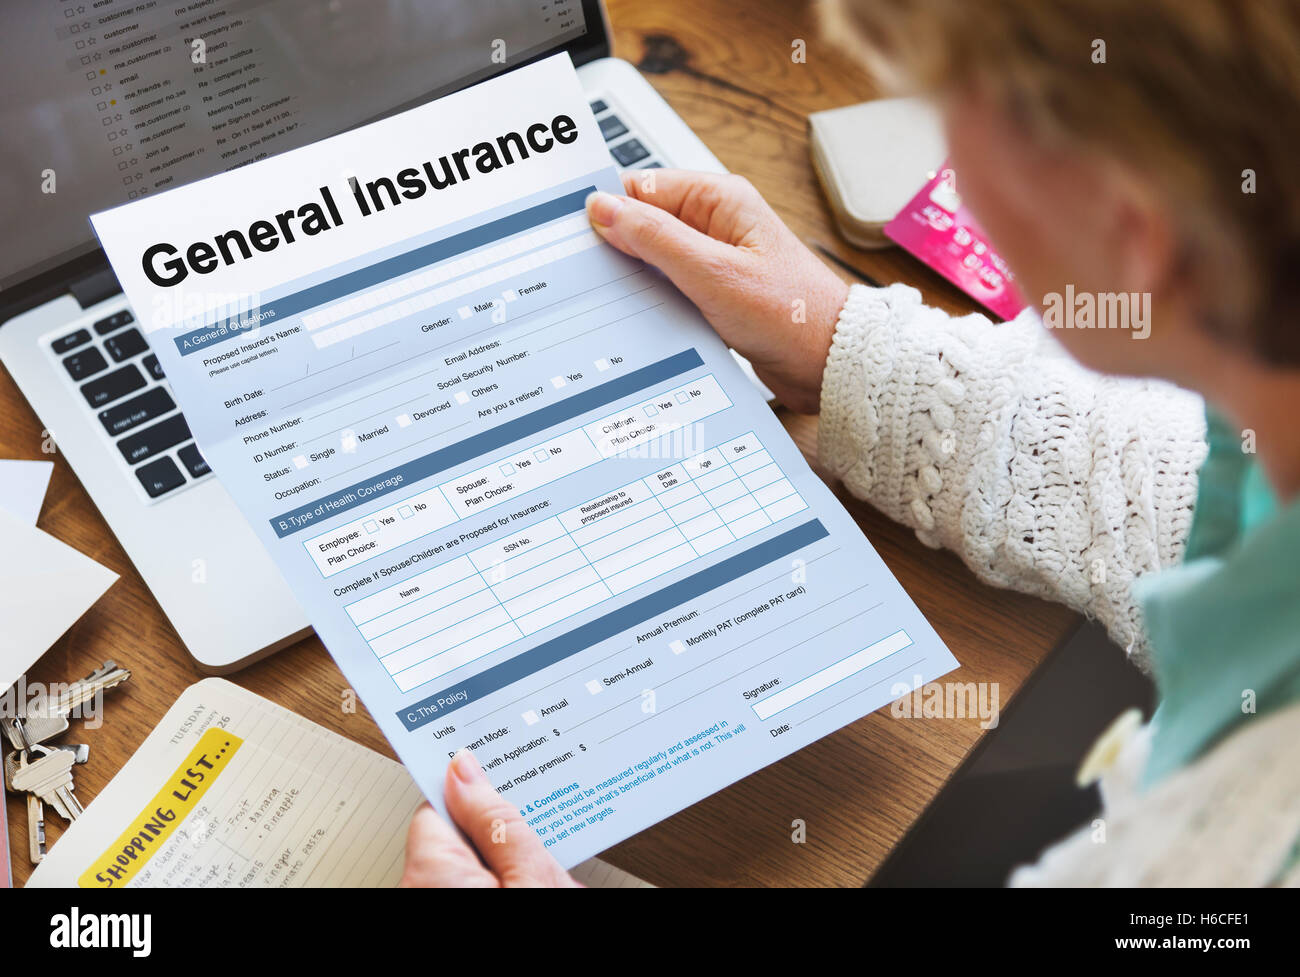 General Insurance Rebate Form Information COncept Stock Photo Alamy